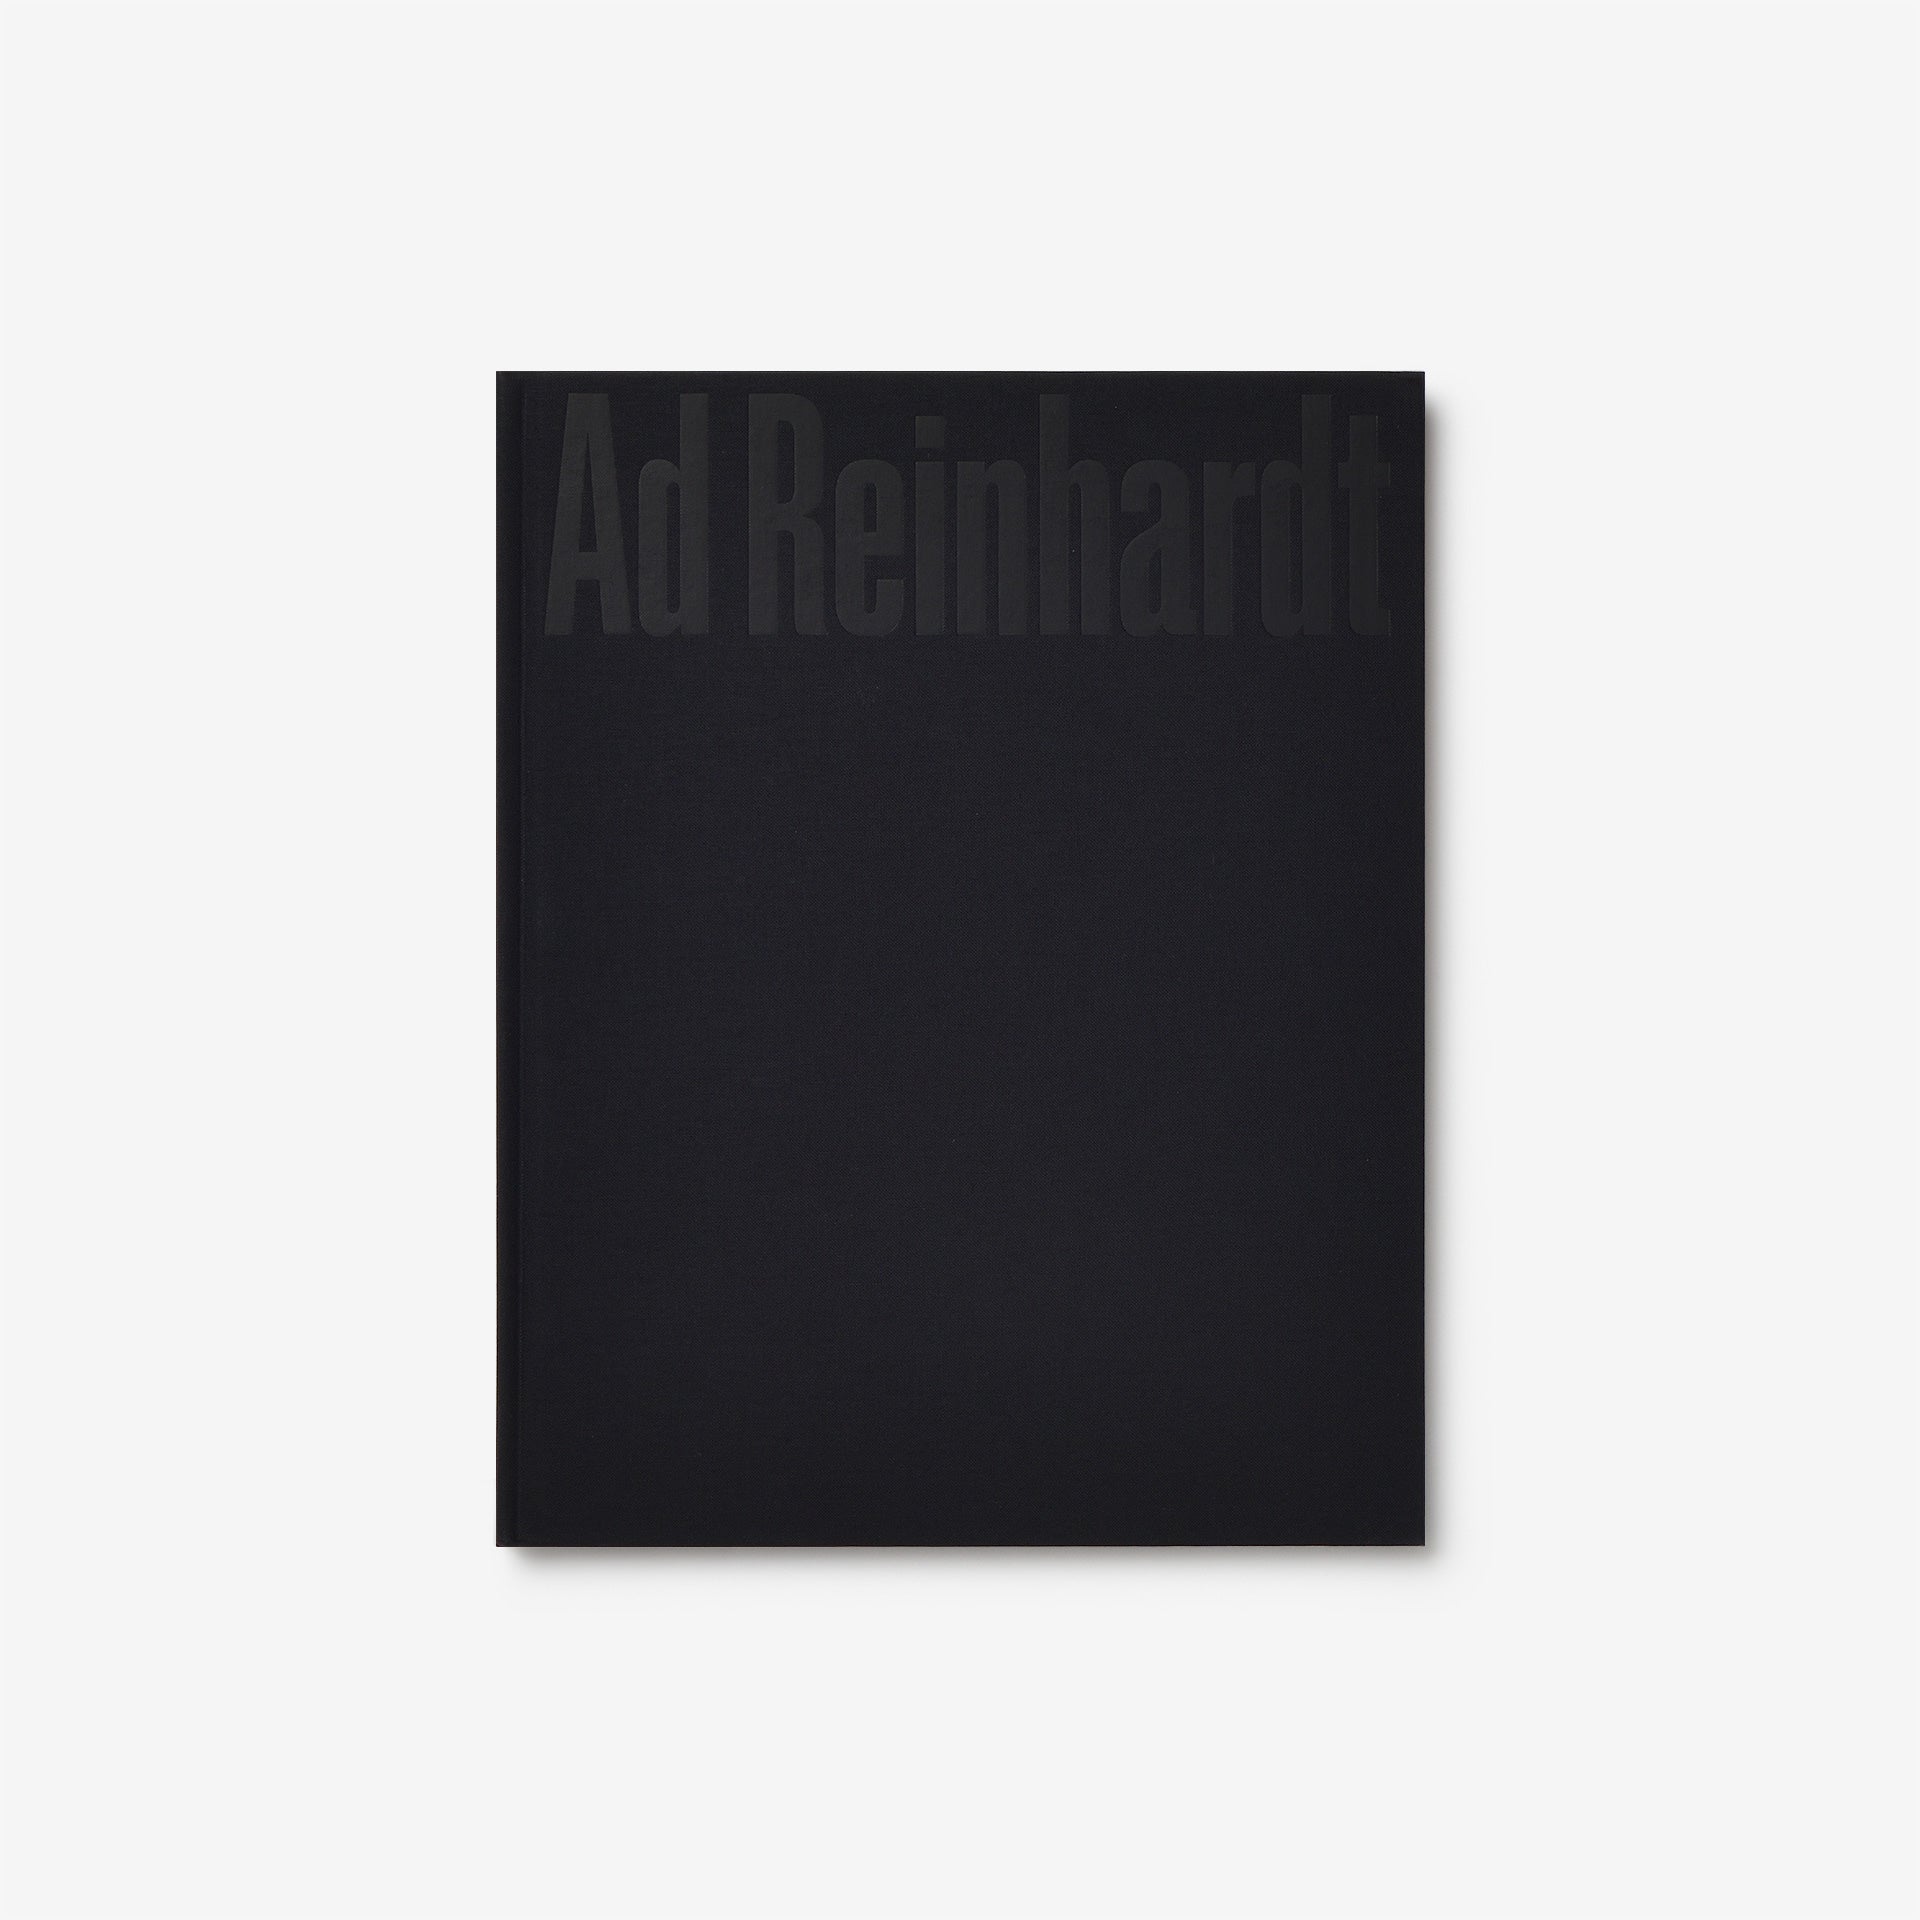 Ad Reinhardt: Color Out of Darkness, Curated by James Turrell